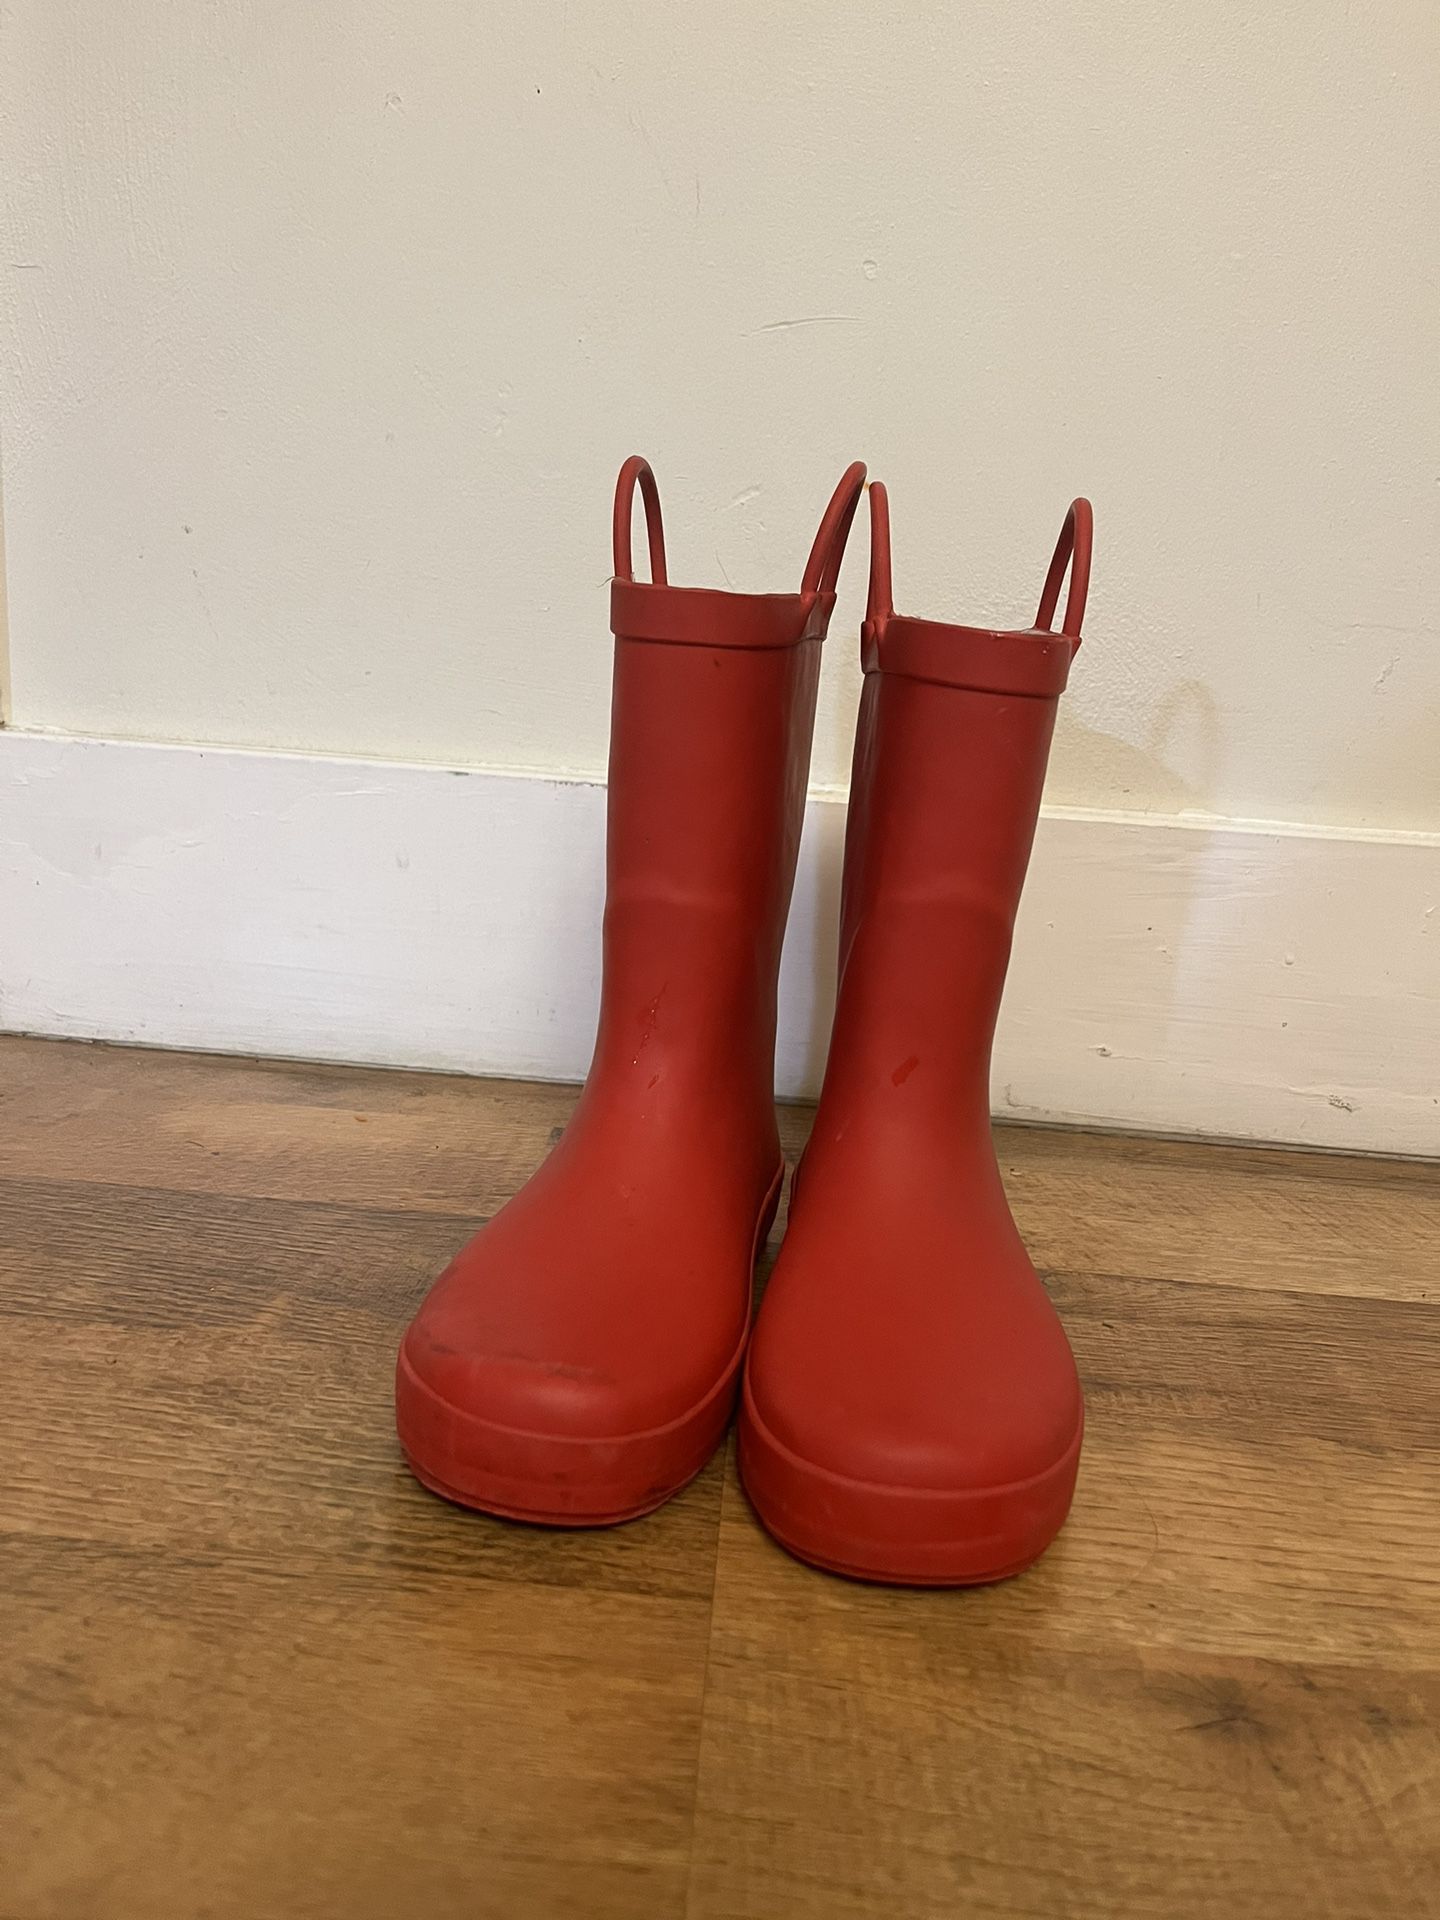 Rubber Boots, Kids, Size 2 (red)